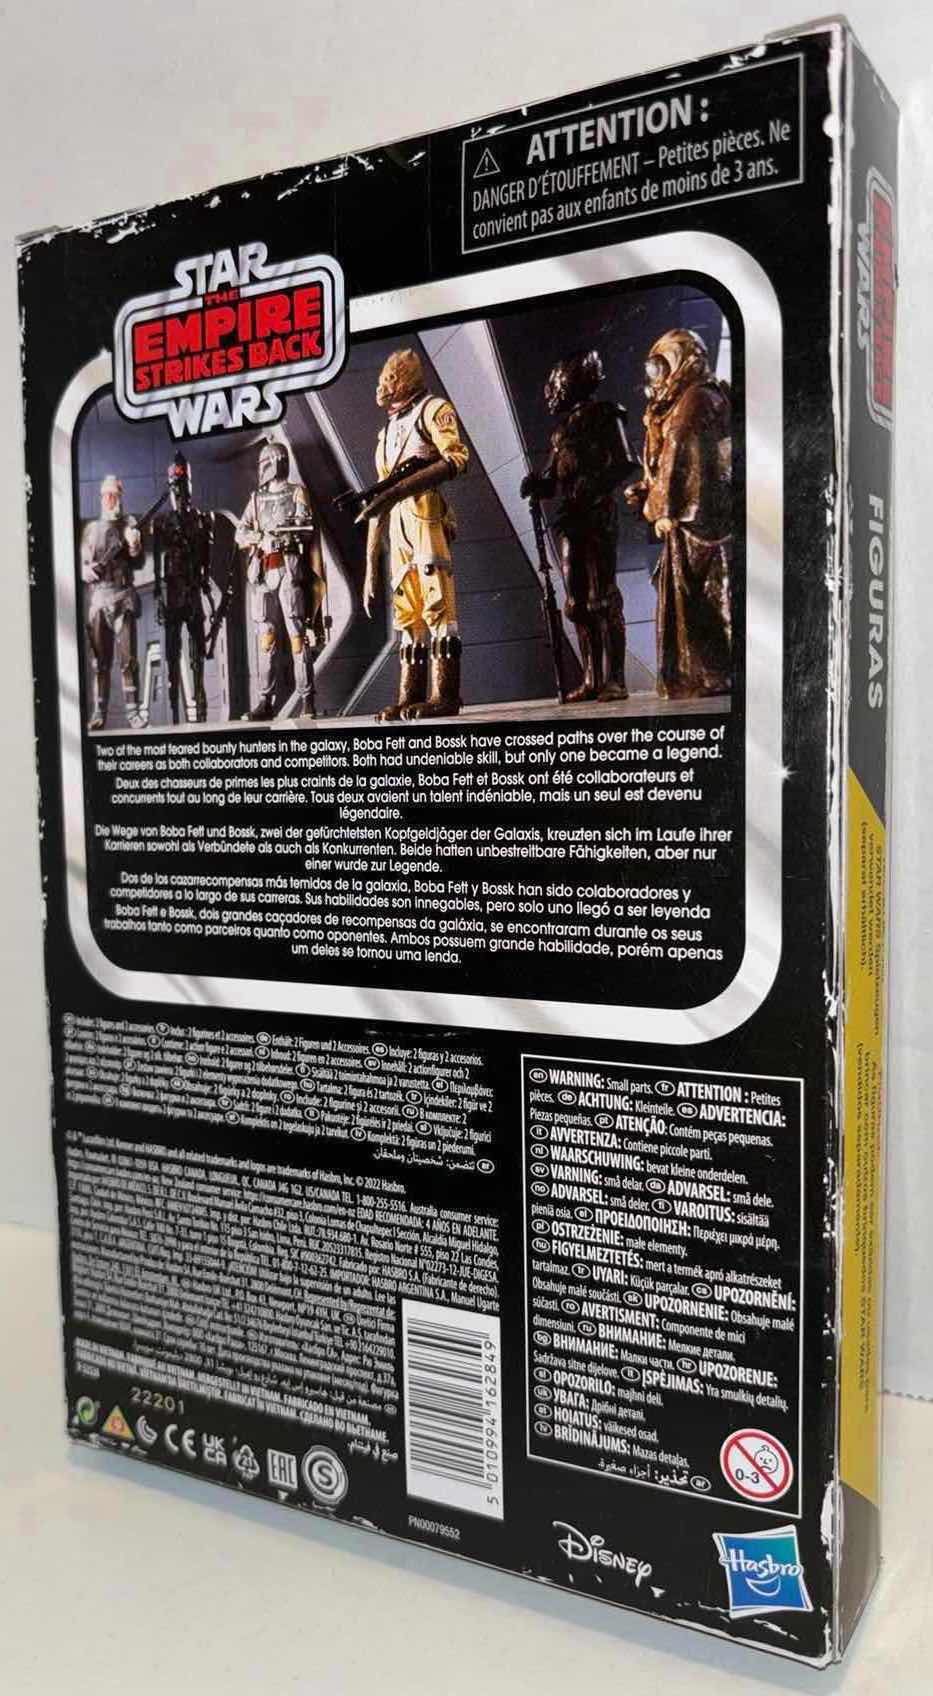 Photo 3 of NEW HASBRO KENNER STAR WARS THE EMPIRE STRIKES BACK RETRO COLLECTION 2-PACK ACTION FIGURES “BOBA FETT” & “BOSSK”